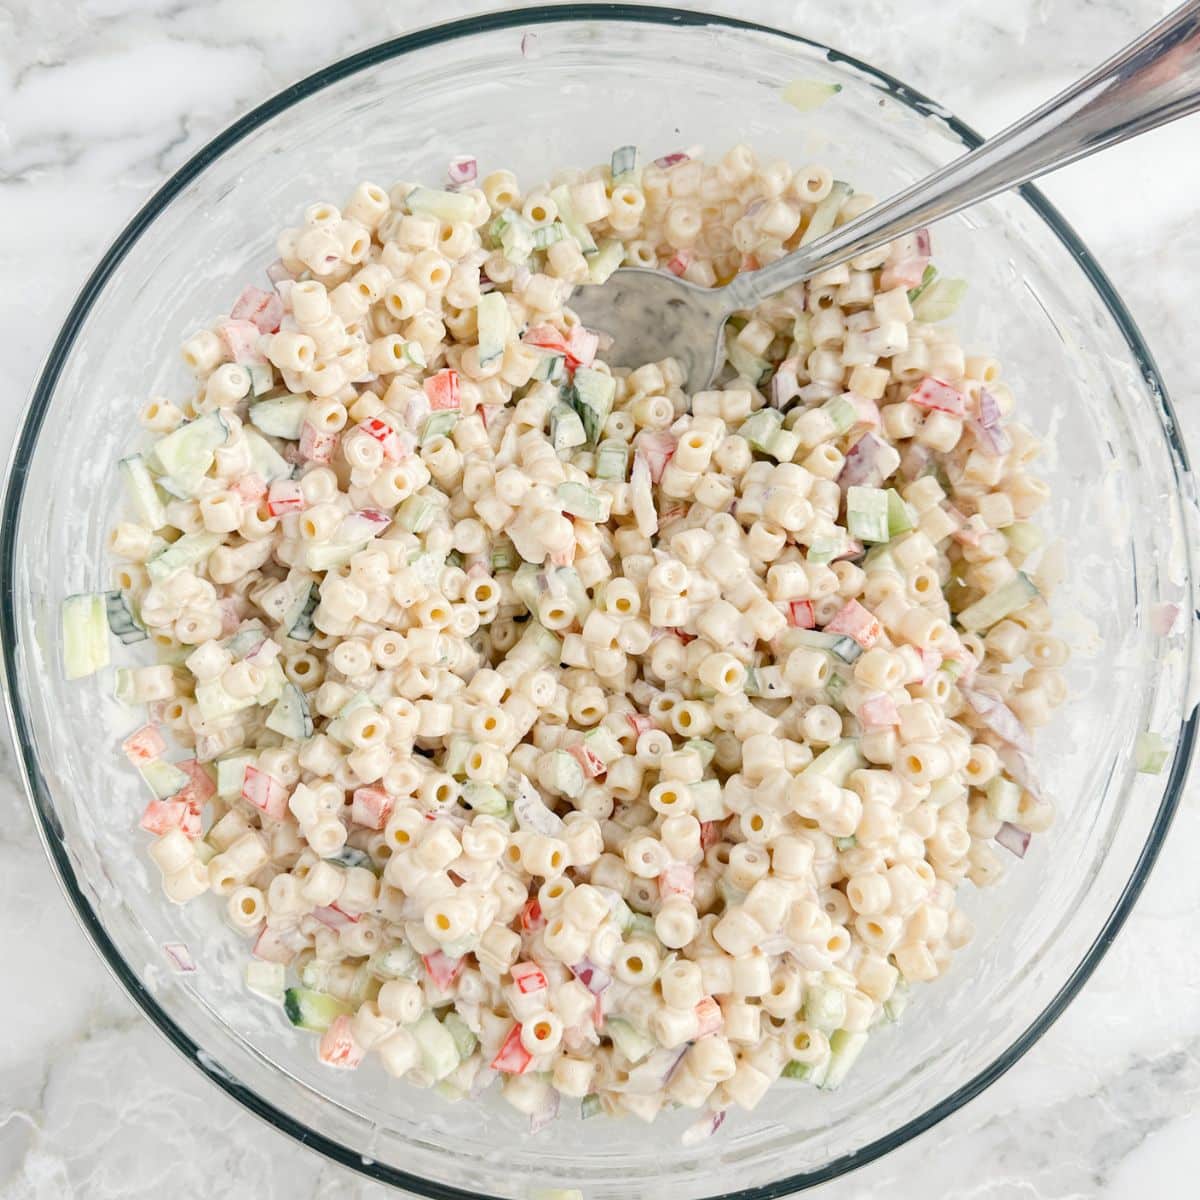 Bowl of creamy pasta salad with a spoon.